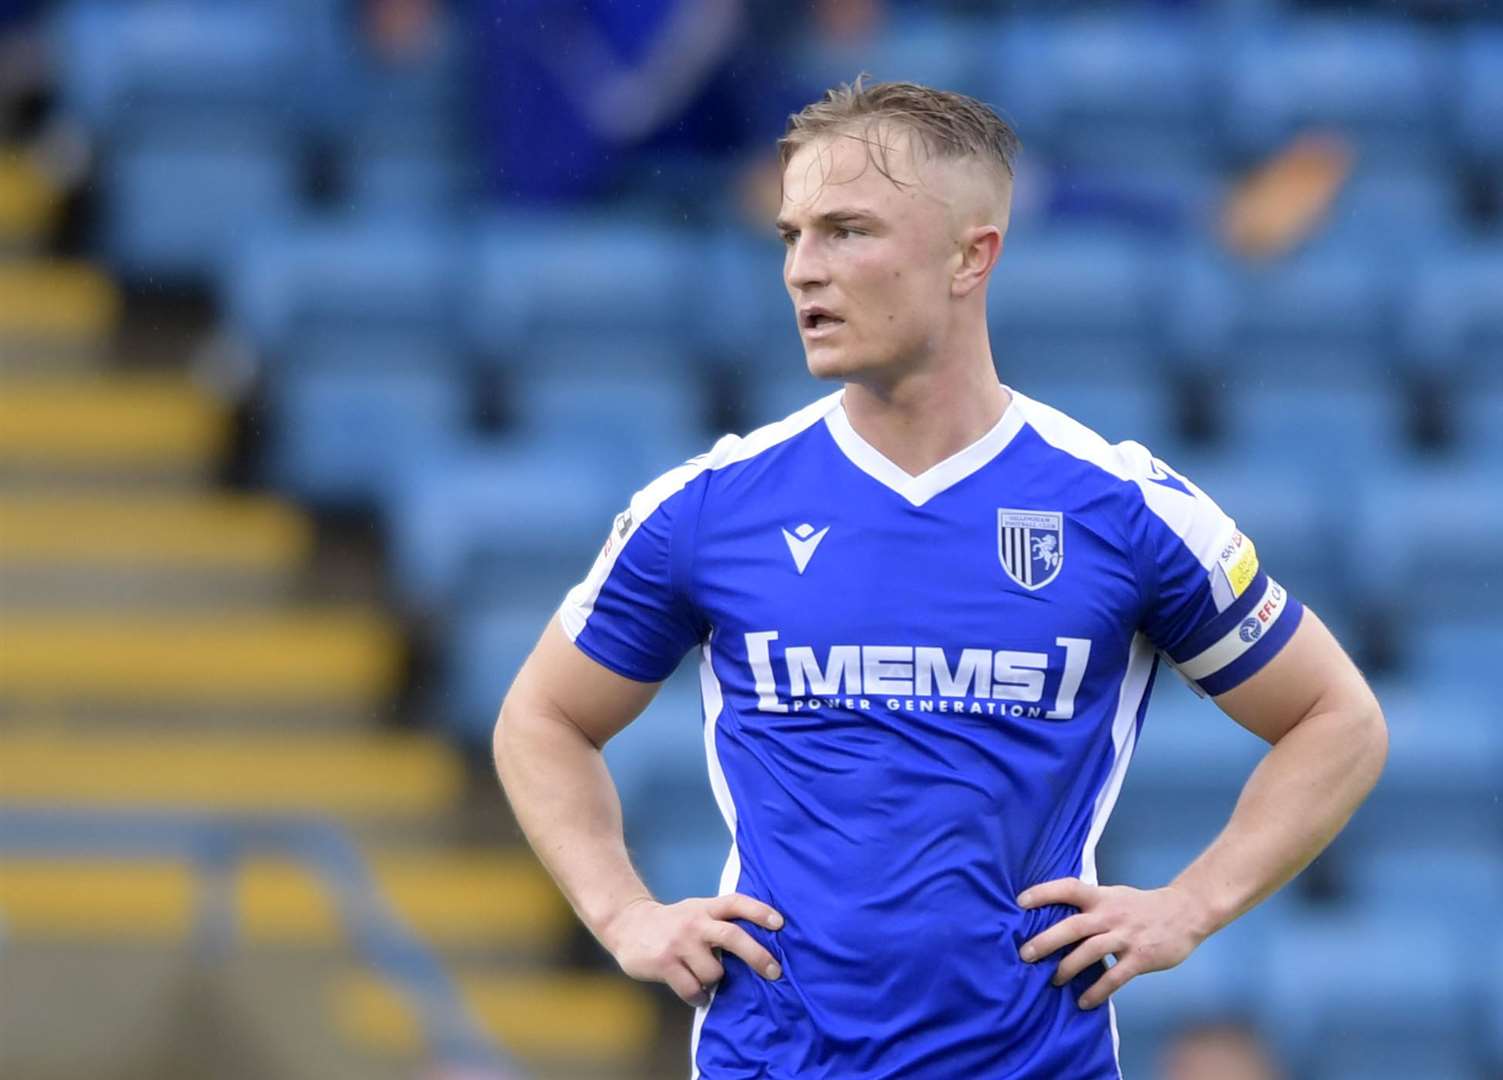 Gillingham captain Kyle Dempsey ready for the league leaders after weekend win